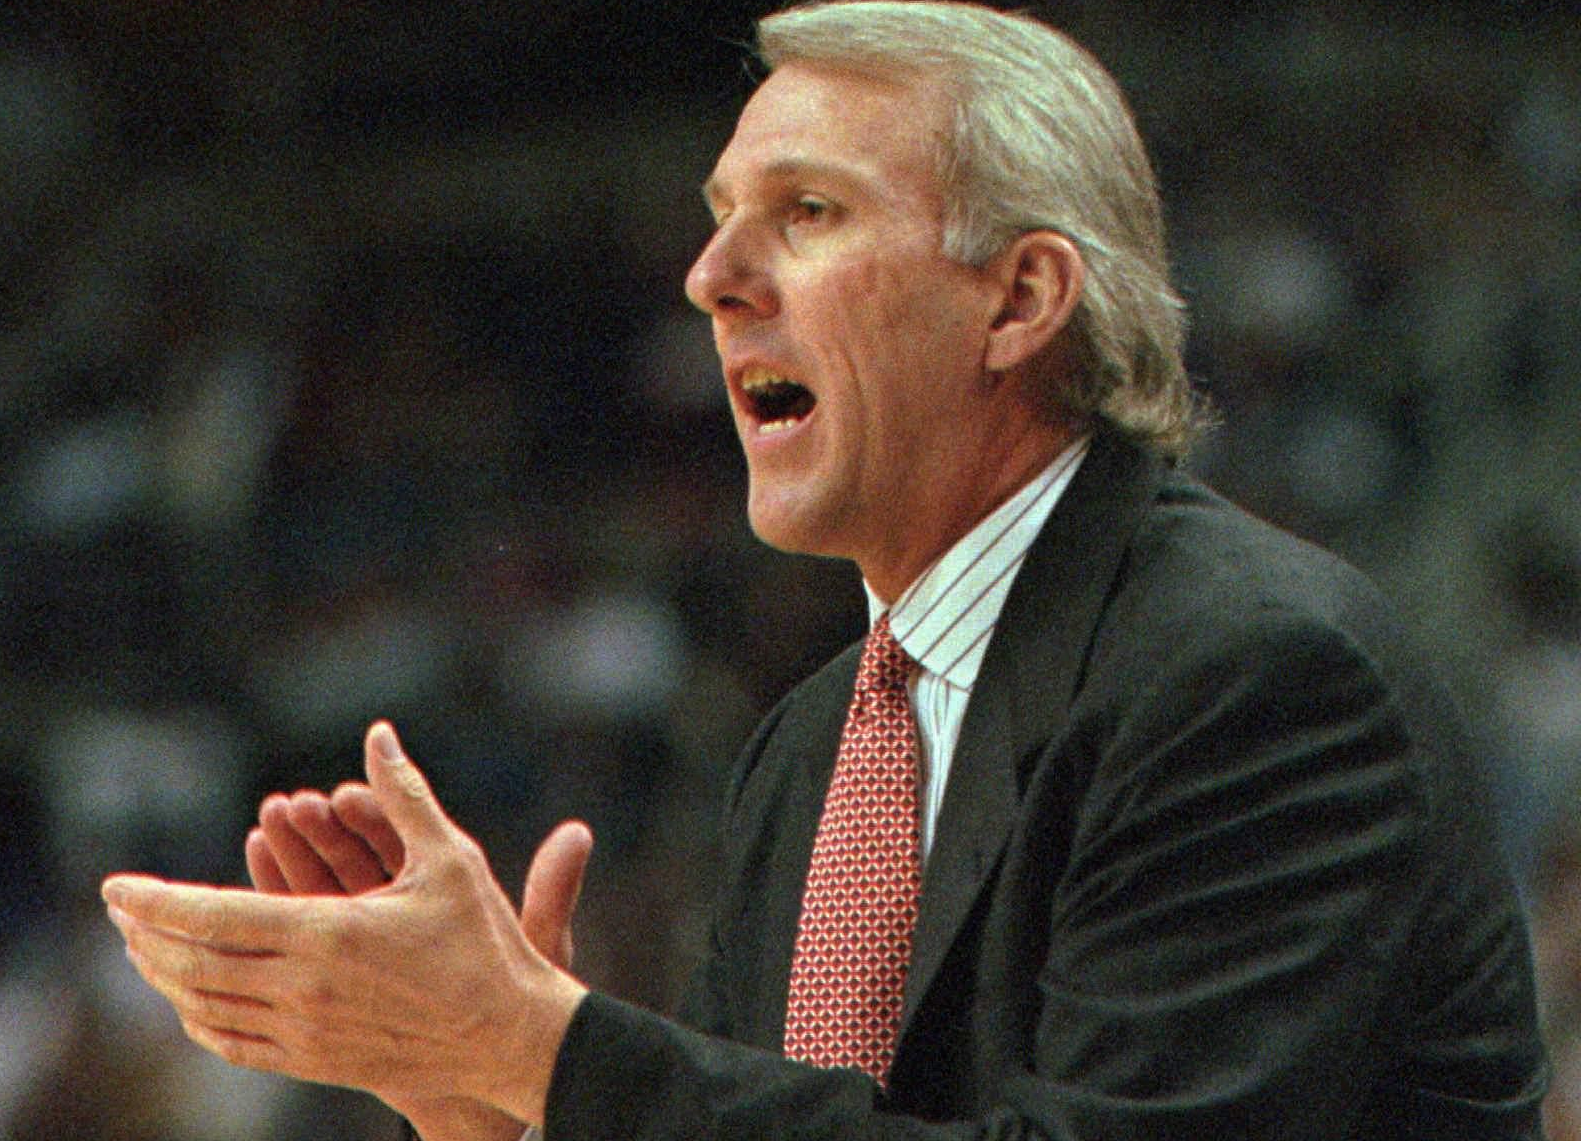 NBA 75: Top 15 coaches in league history revealed